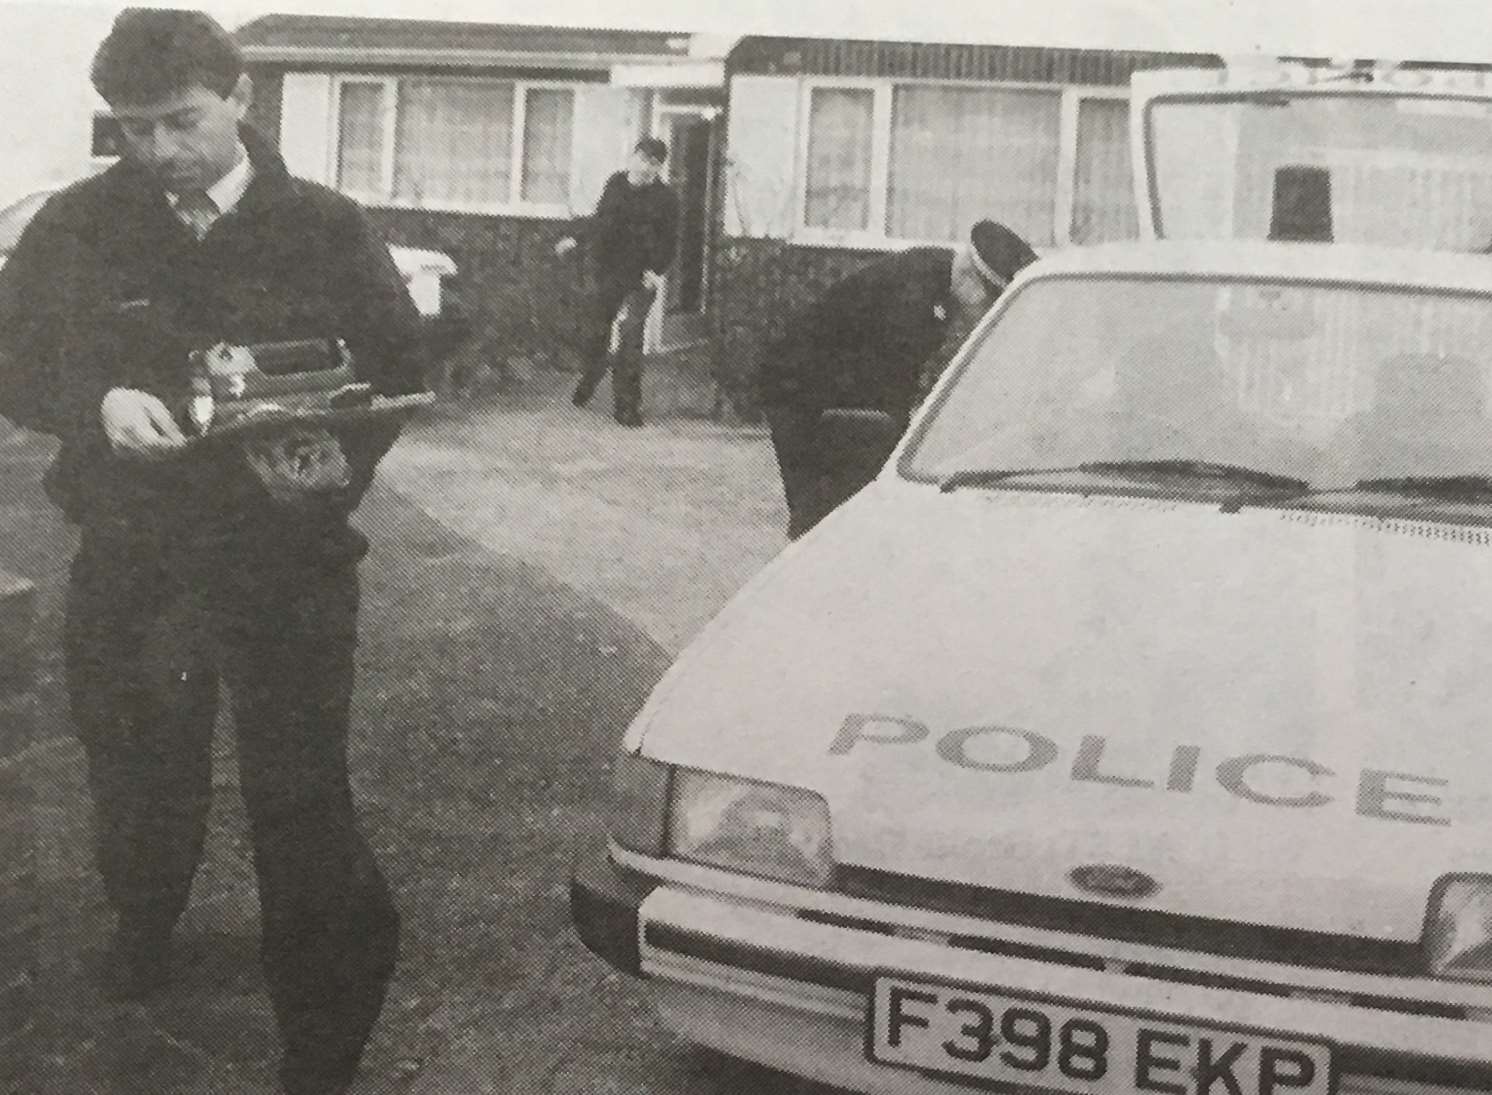 Police at the Rainham bungalow where Acott killed his mother